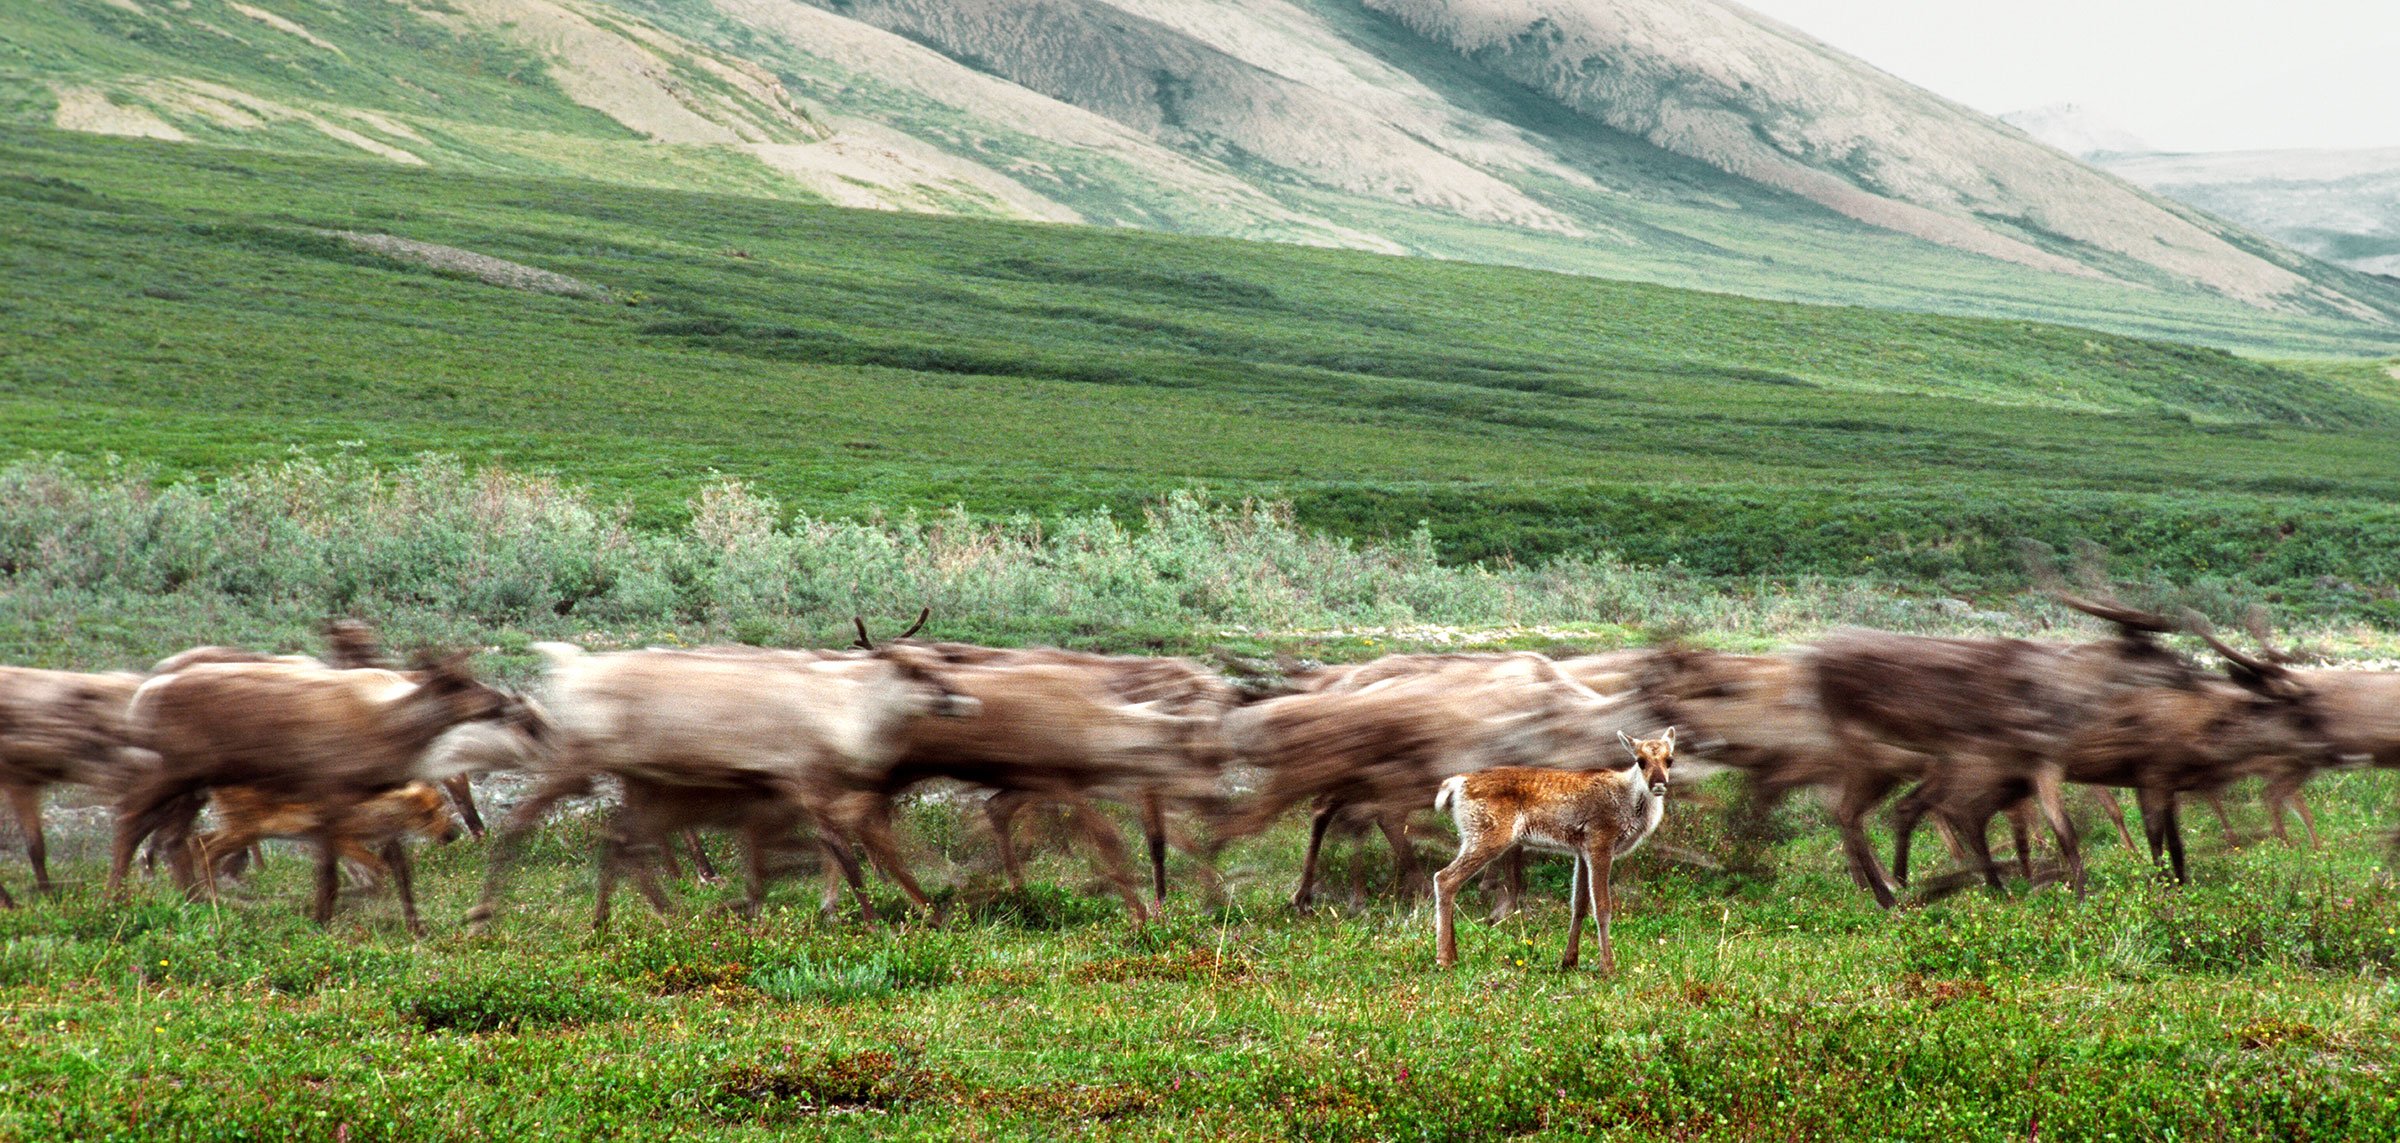 Porcupine caribou are blurred in their movement as a single calf pauses to look at the camera